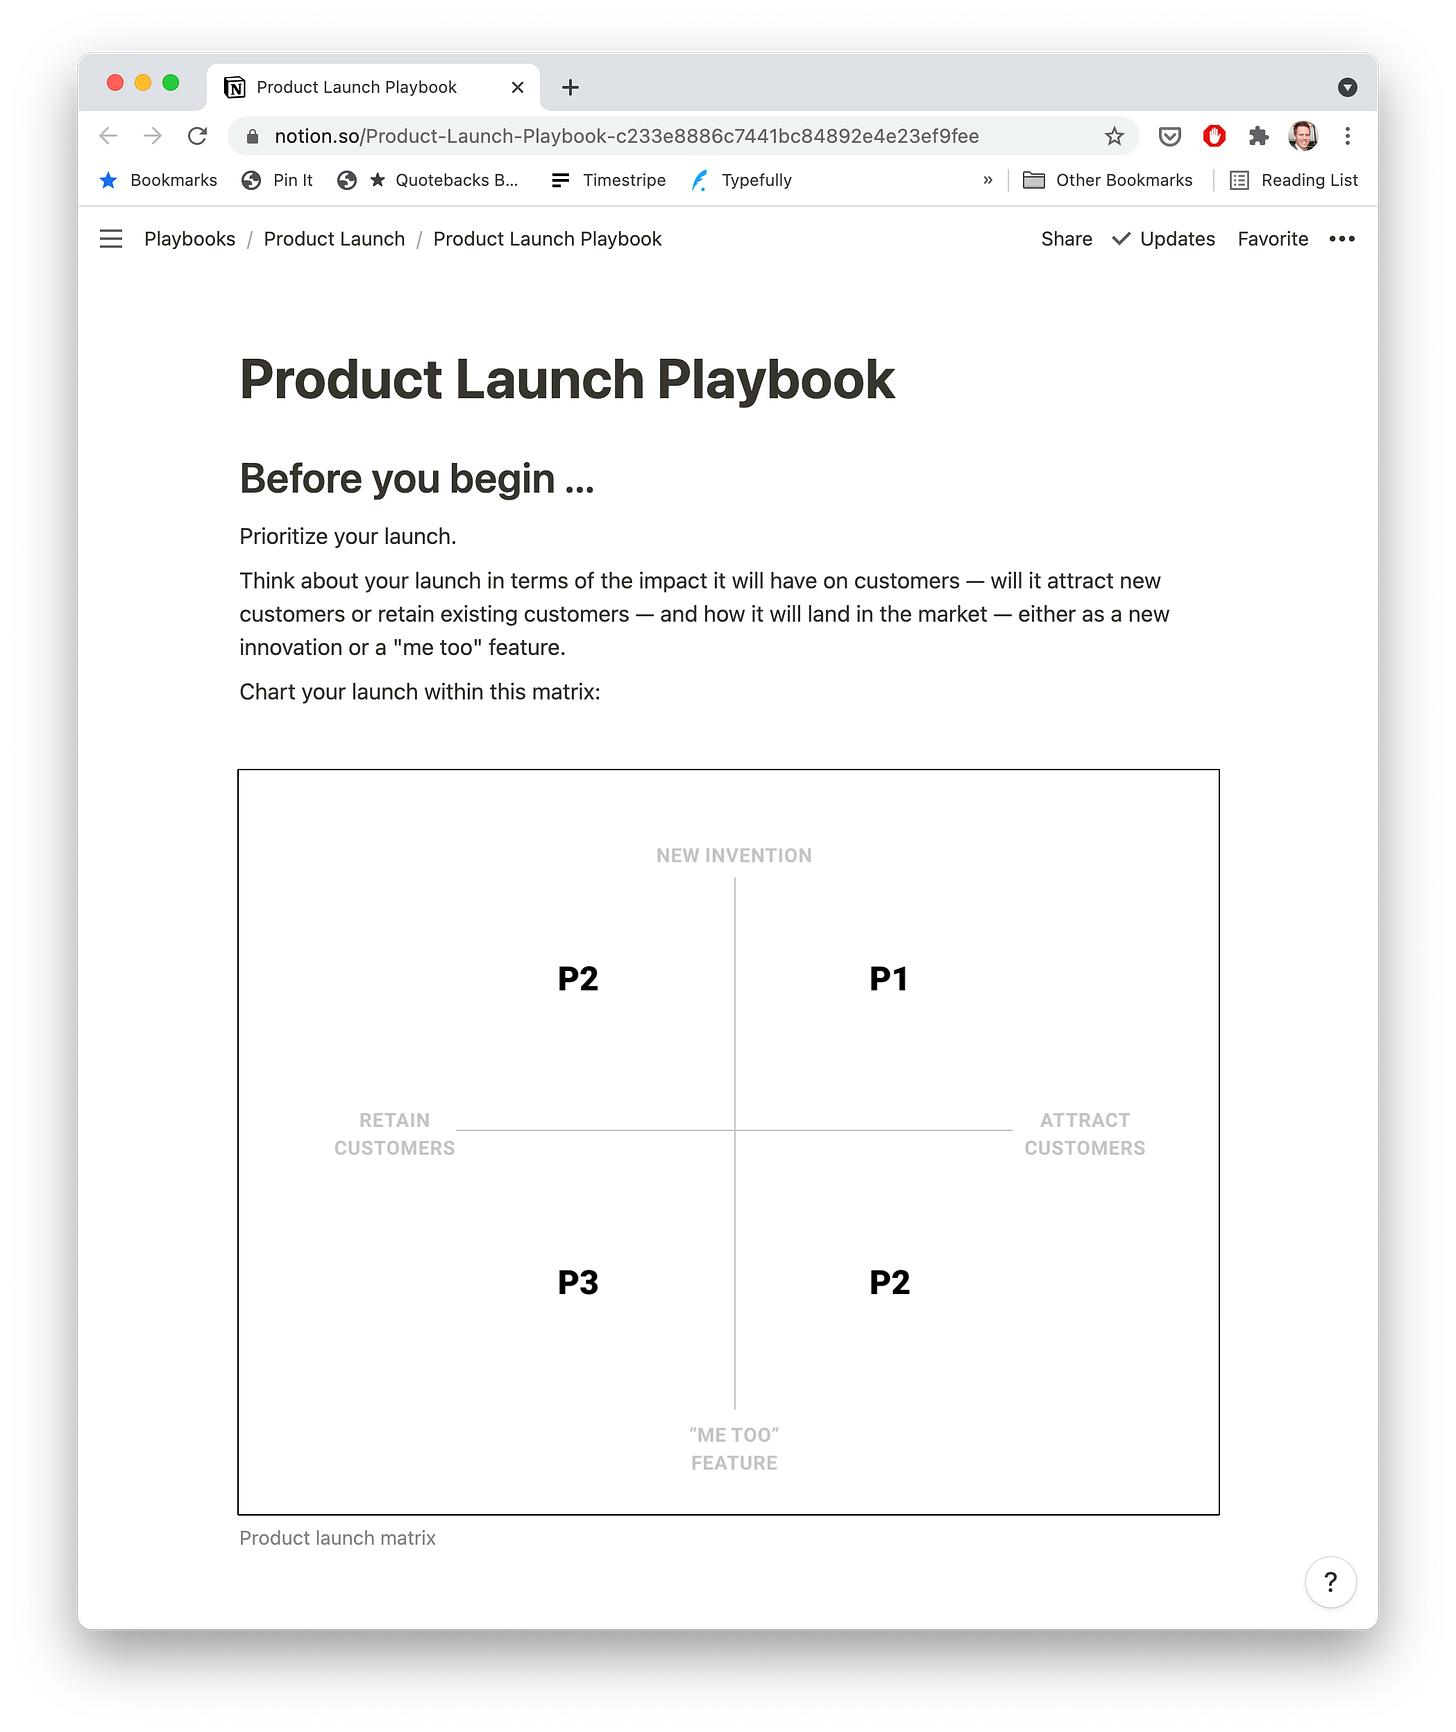 Product launch playbook in Notion